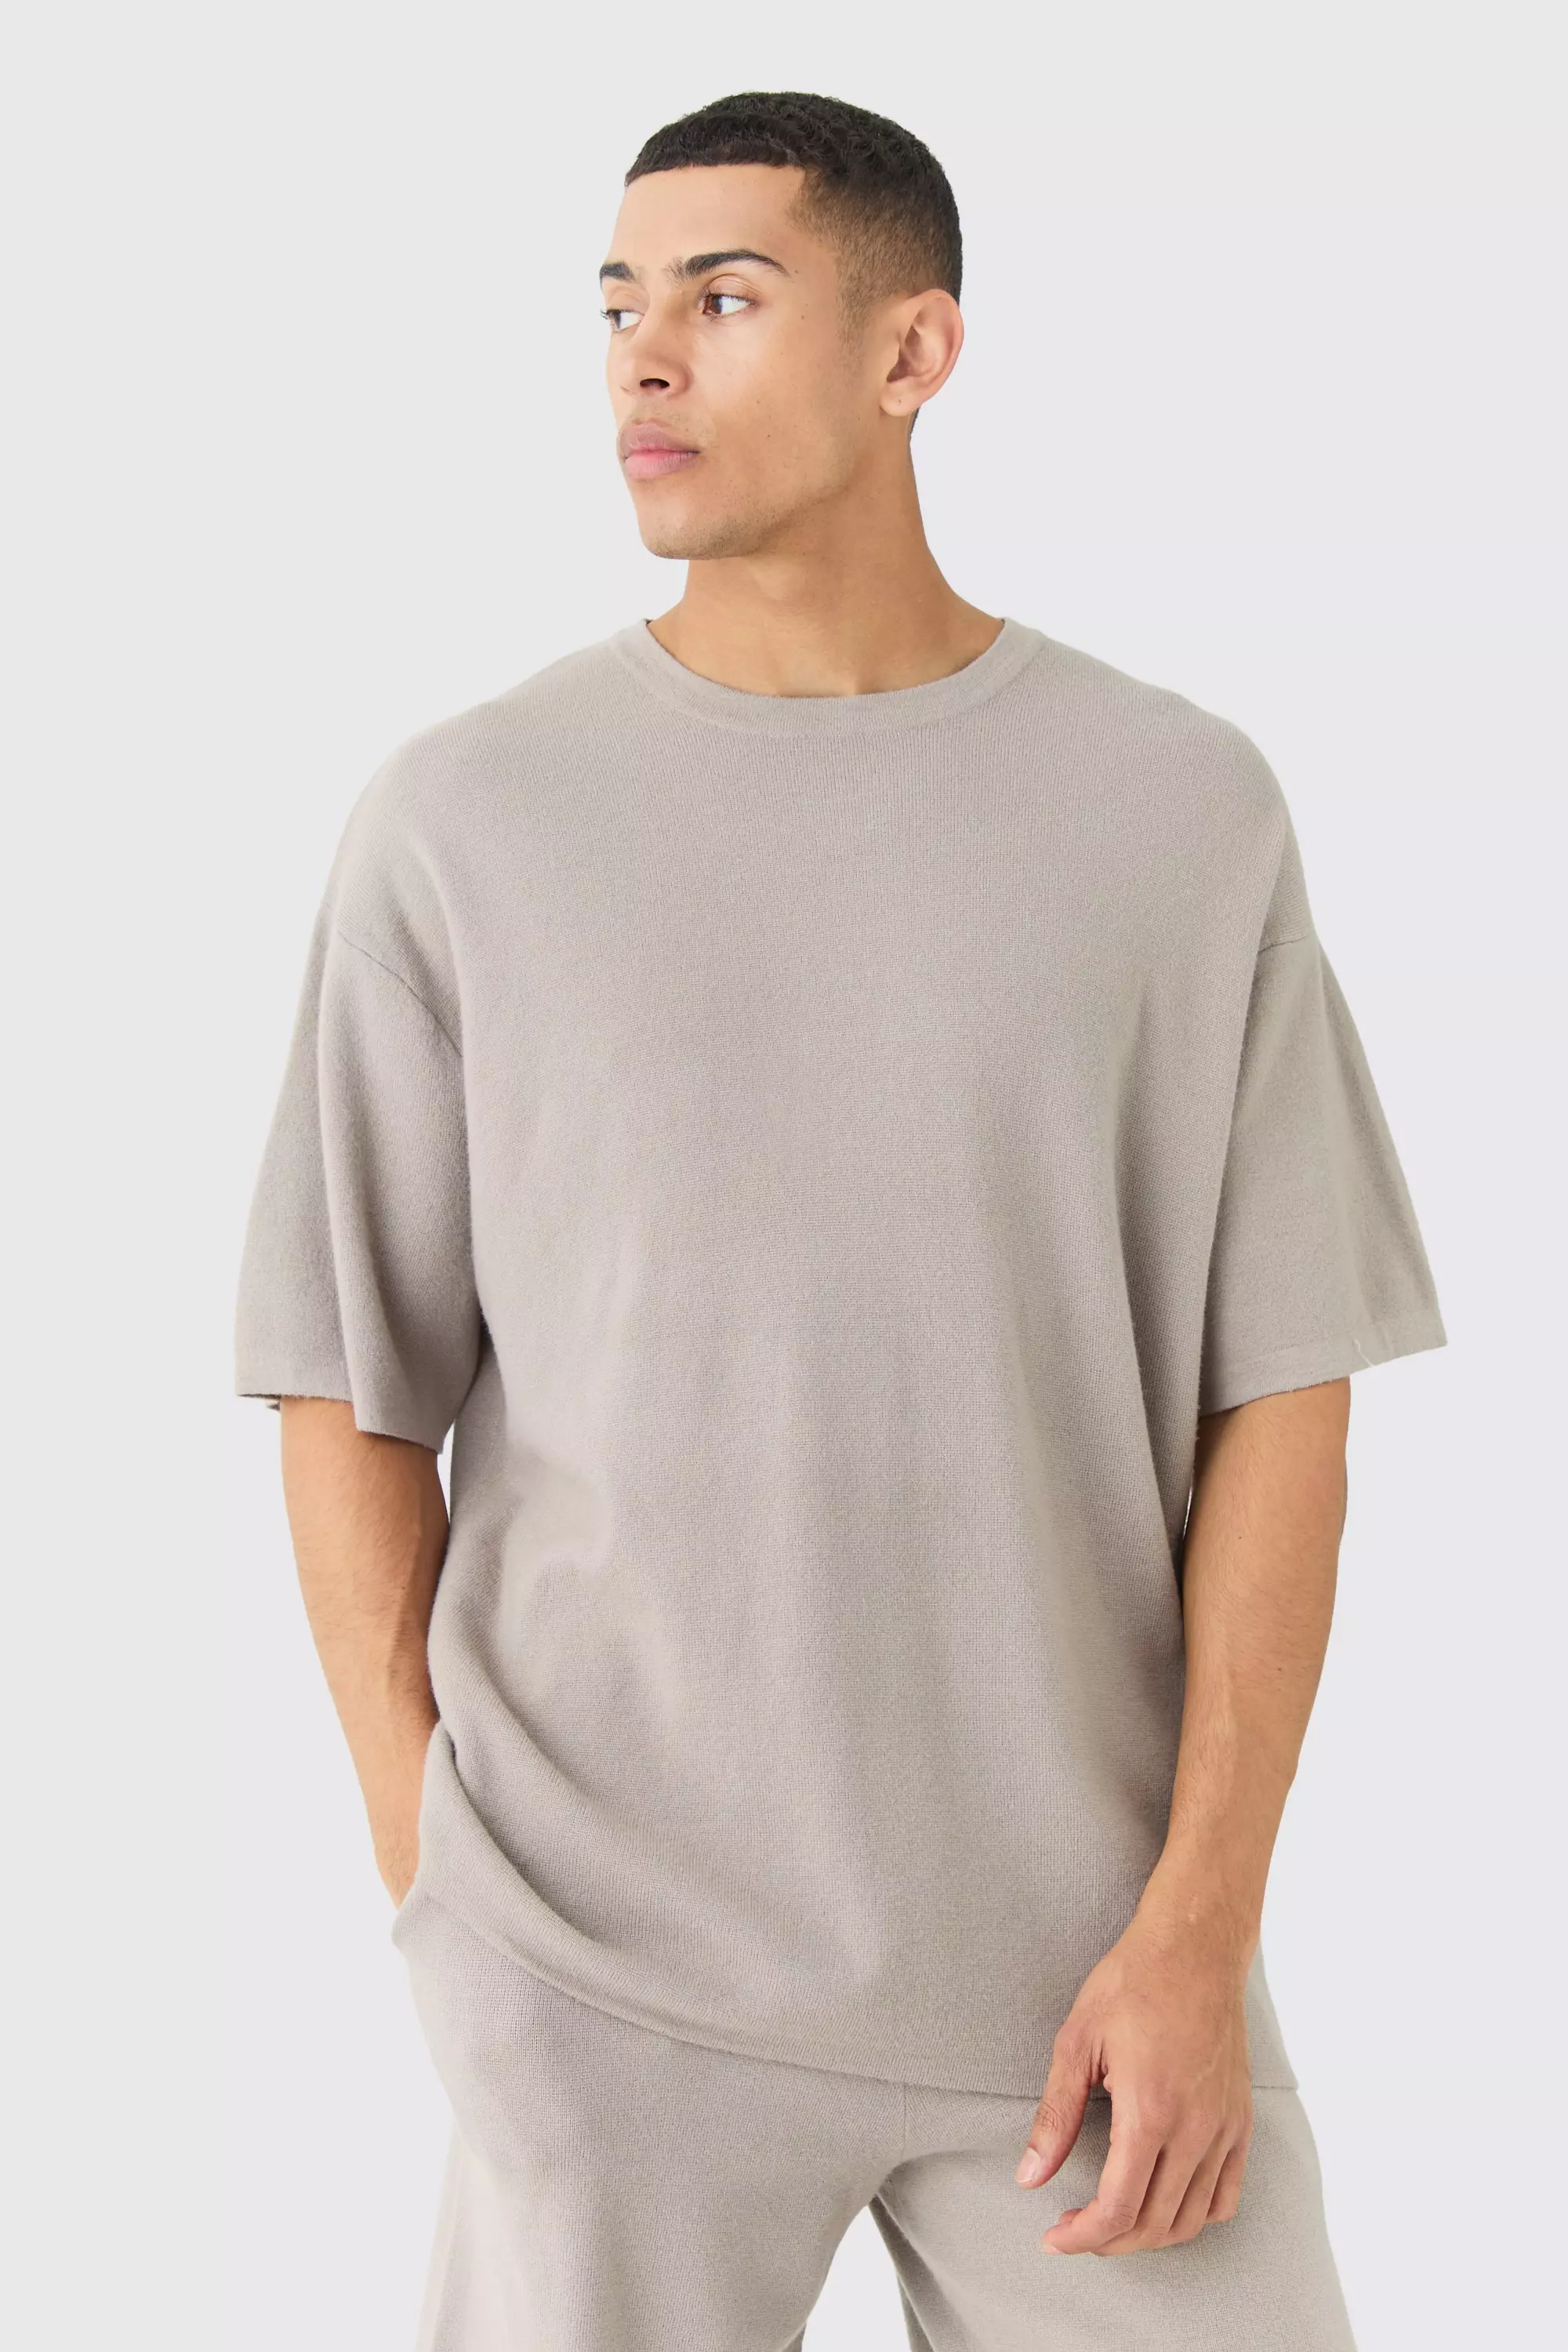 Grey Oversized Knitted T-shirt